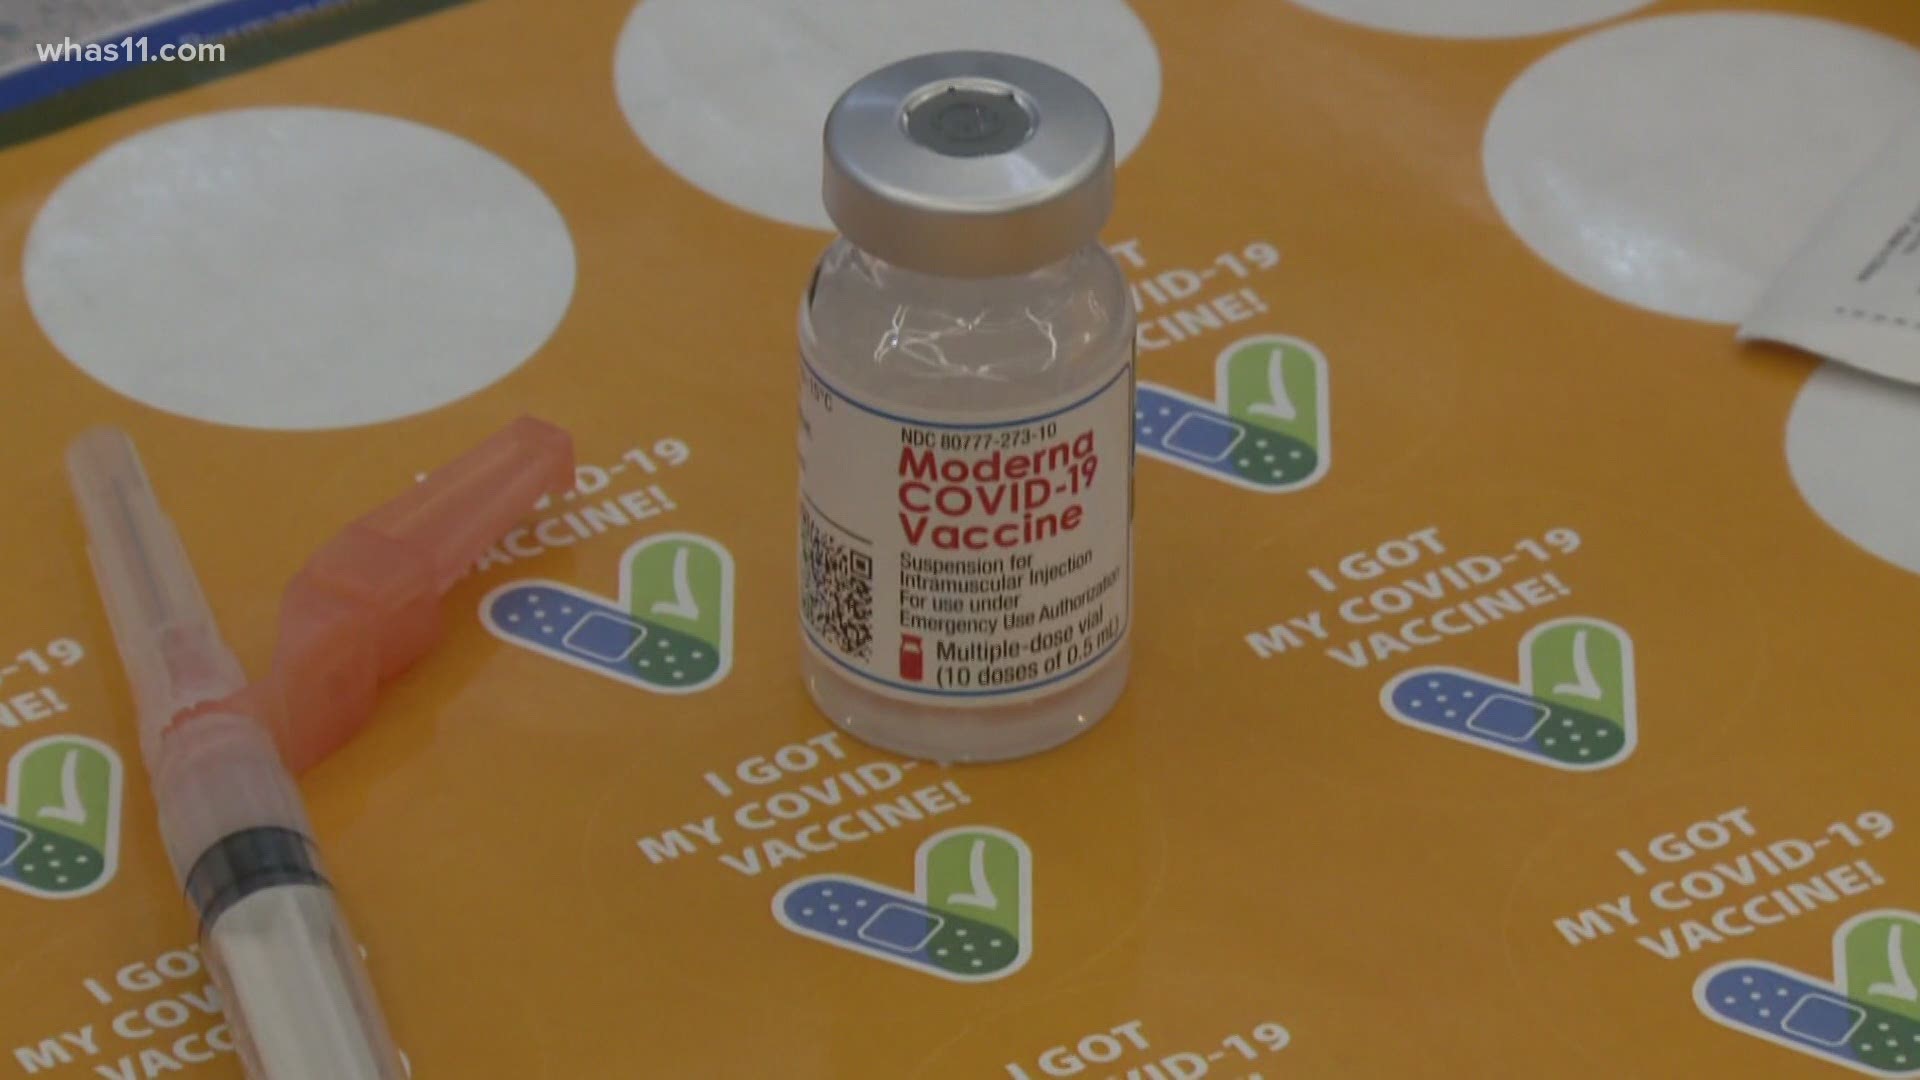 Since the opening of the LouVax site at Broadbent Arena, 16,000 public and private educators have received their first dose of the COVID-19 vaccine.